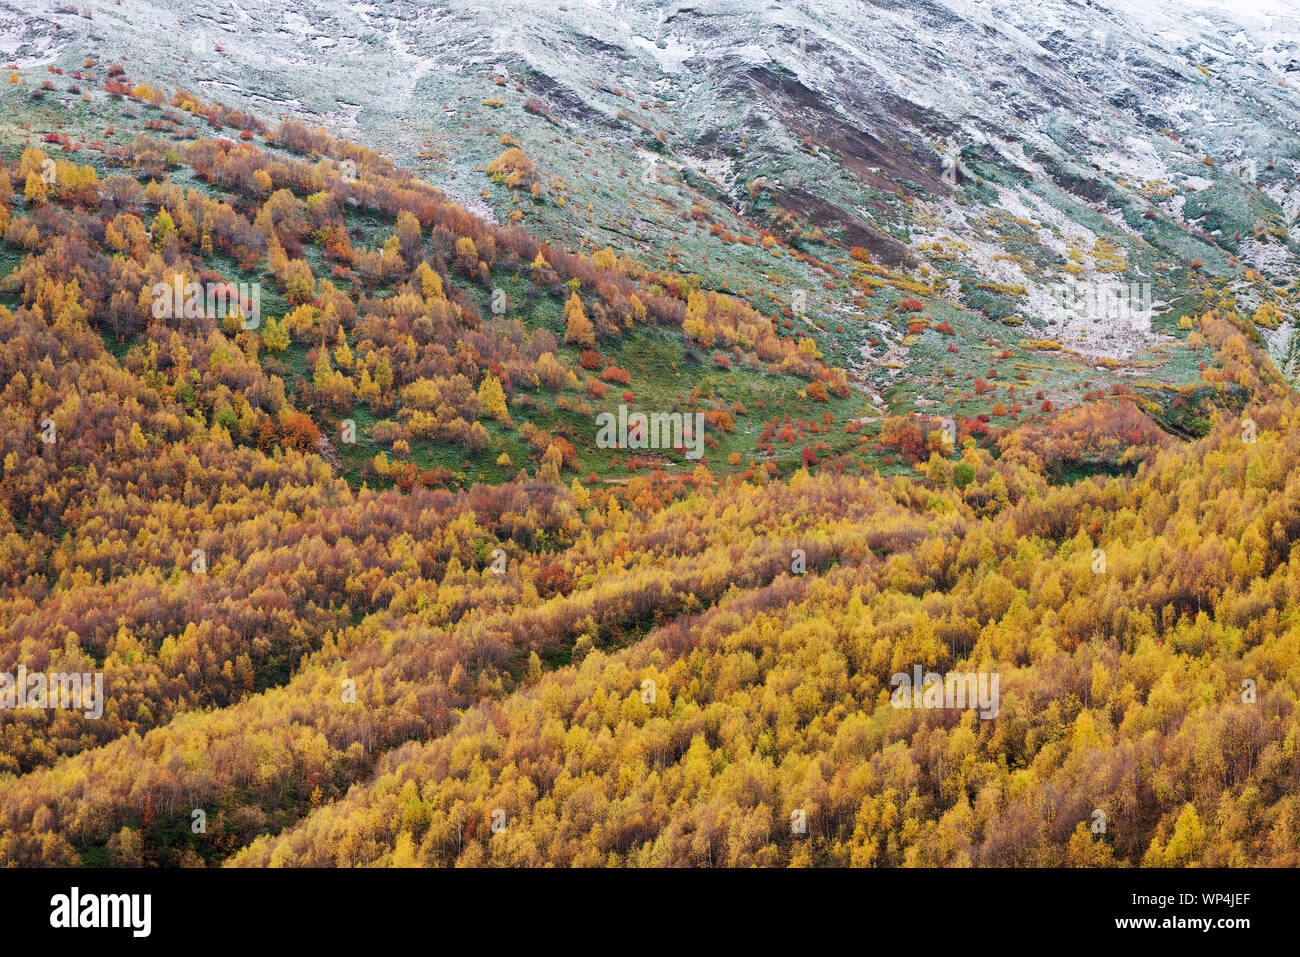 Beautiful birch forest on the mountain slopes. Autumn landscape with yellow trees Stock Photo